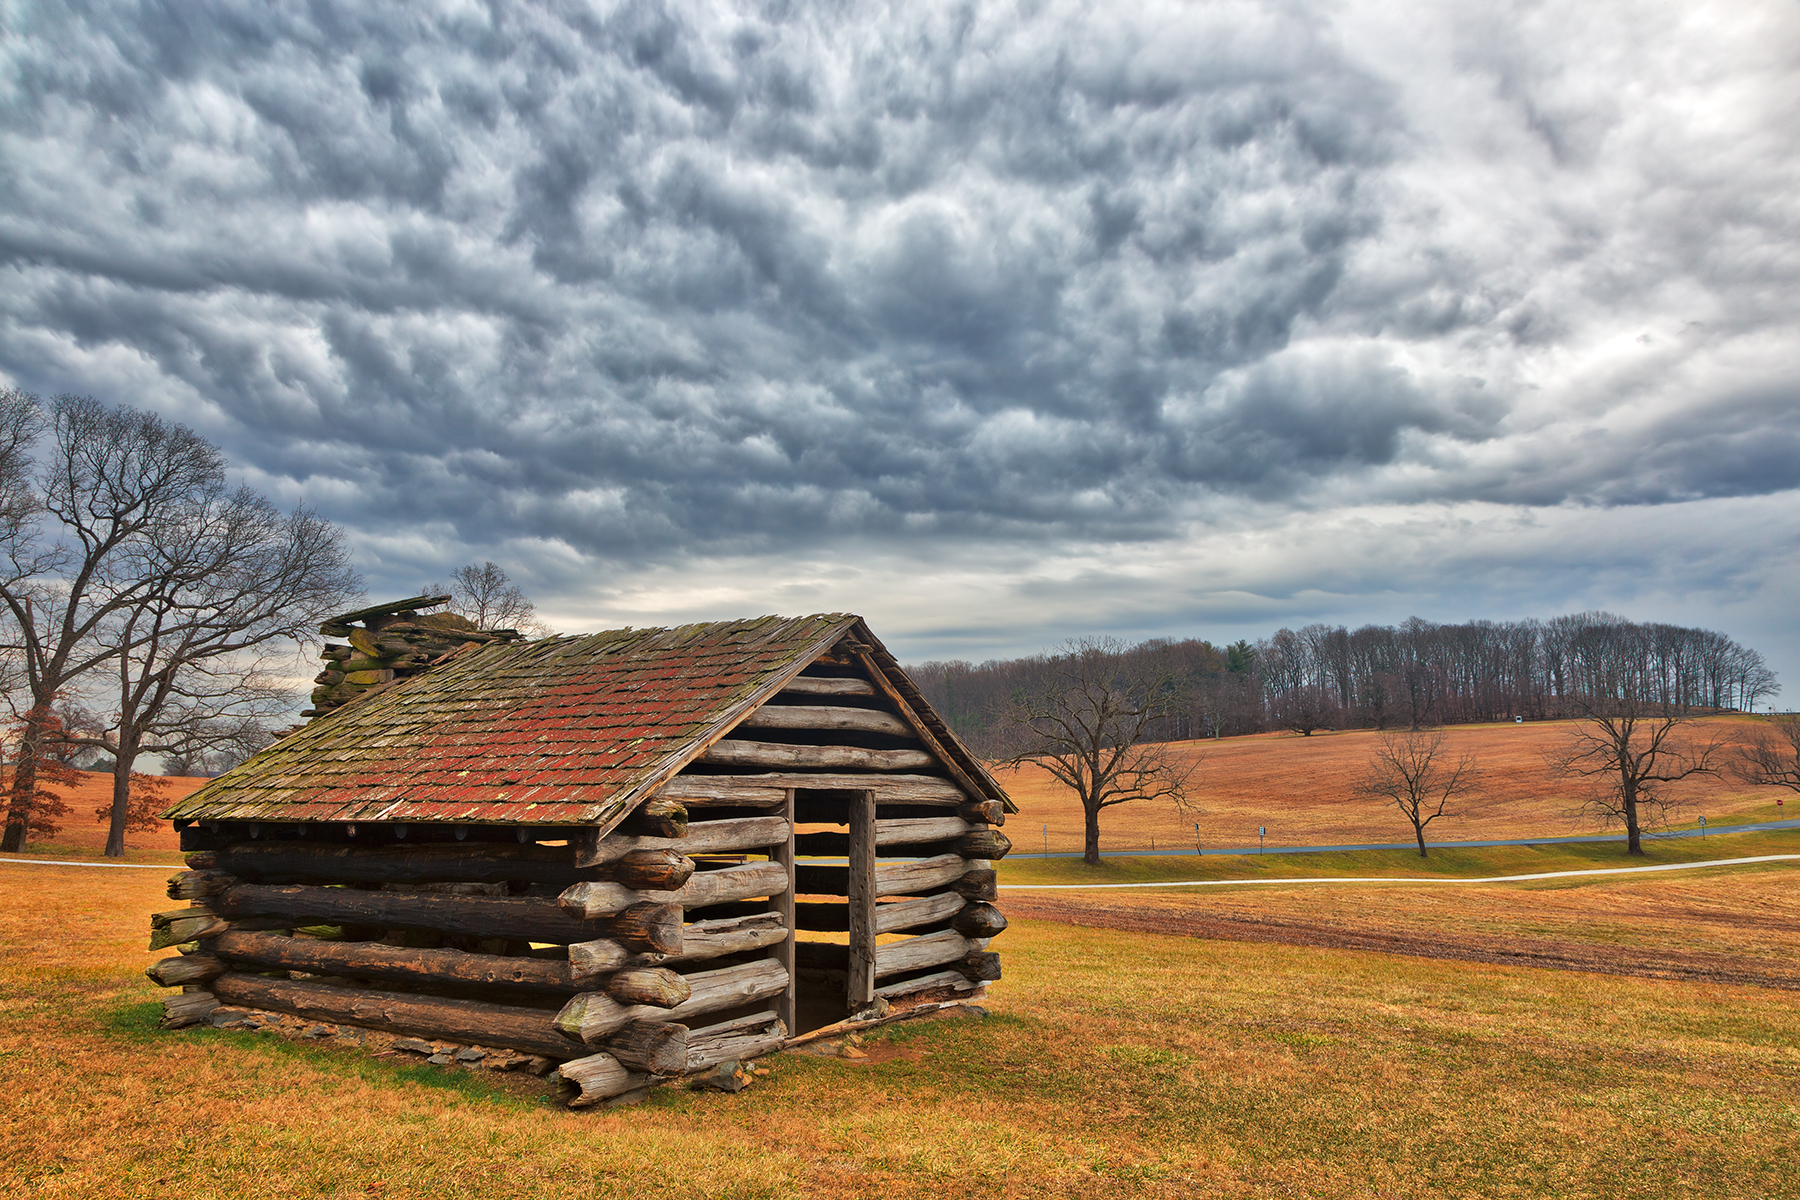 Valley forge cabin cloudscape - hdr photo